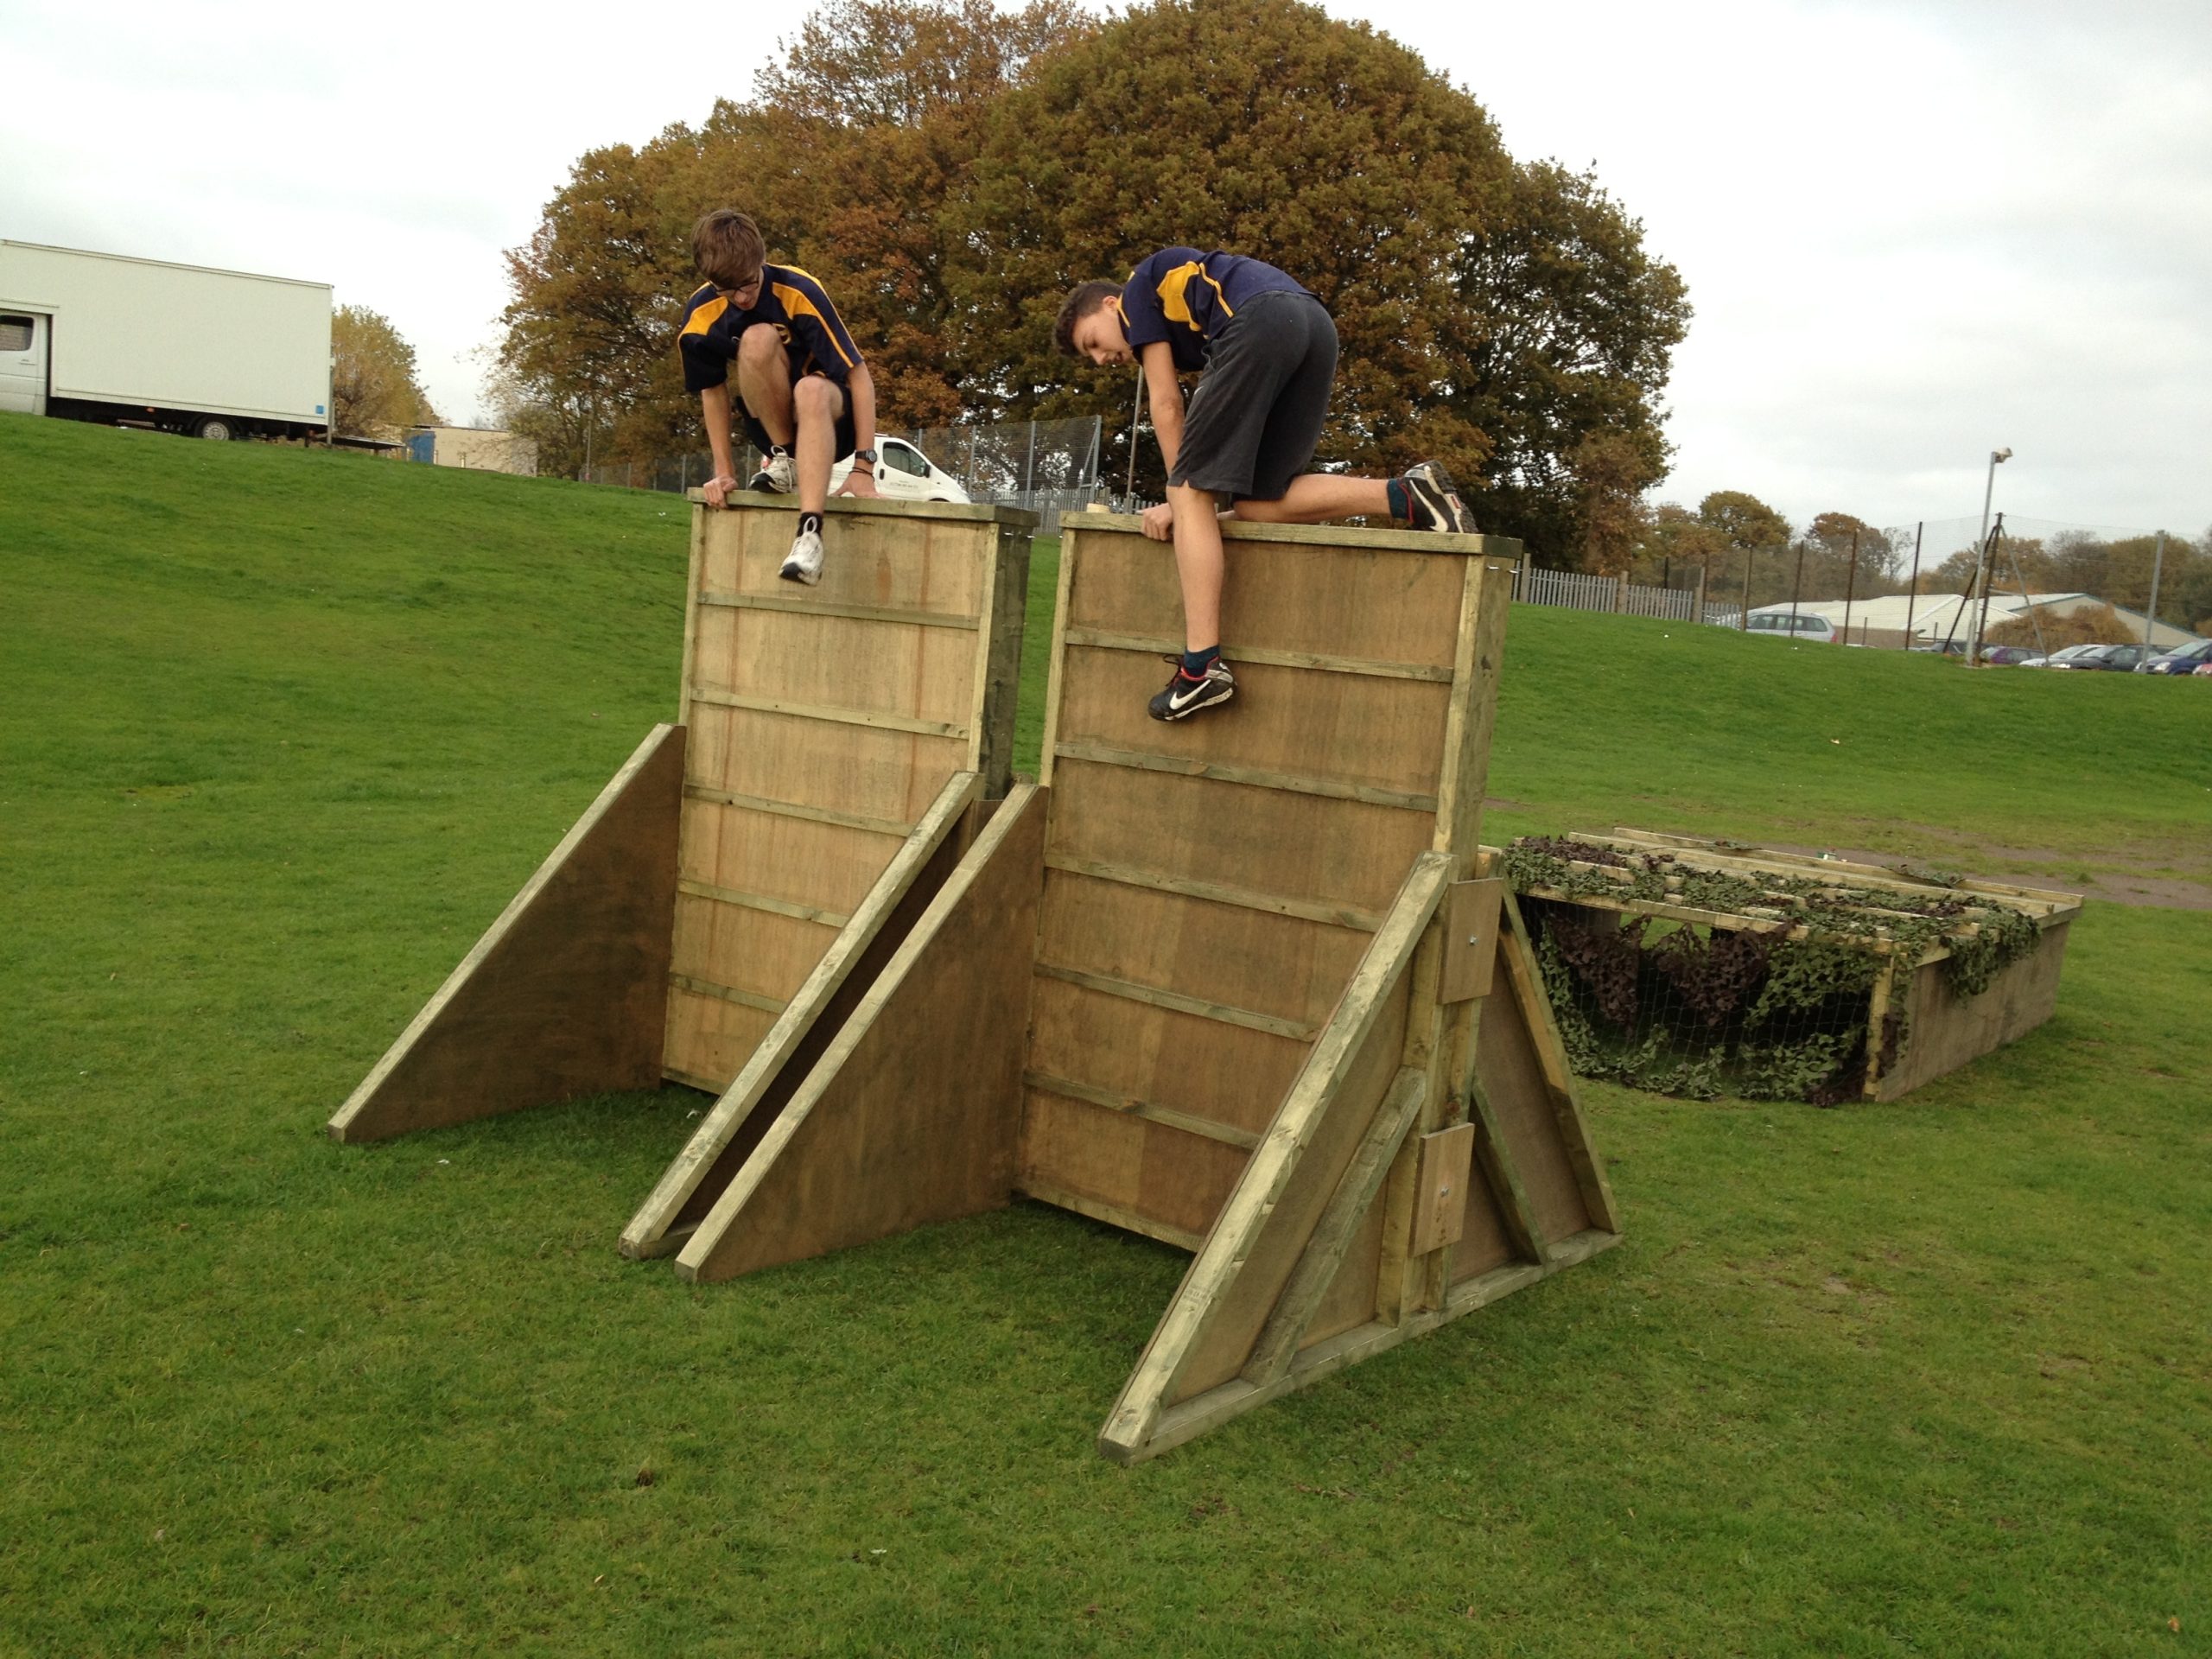 Children Climbing Over Obstacle Course Wall